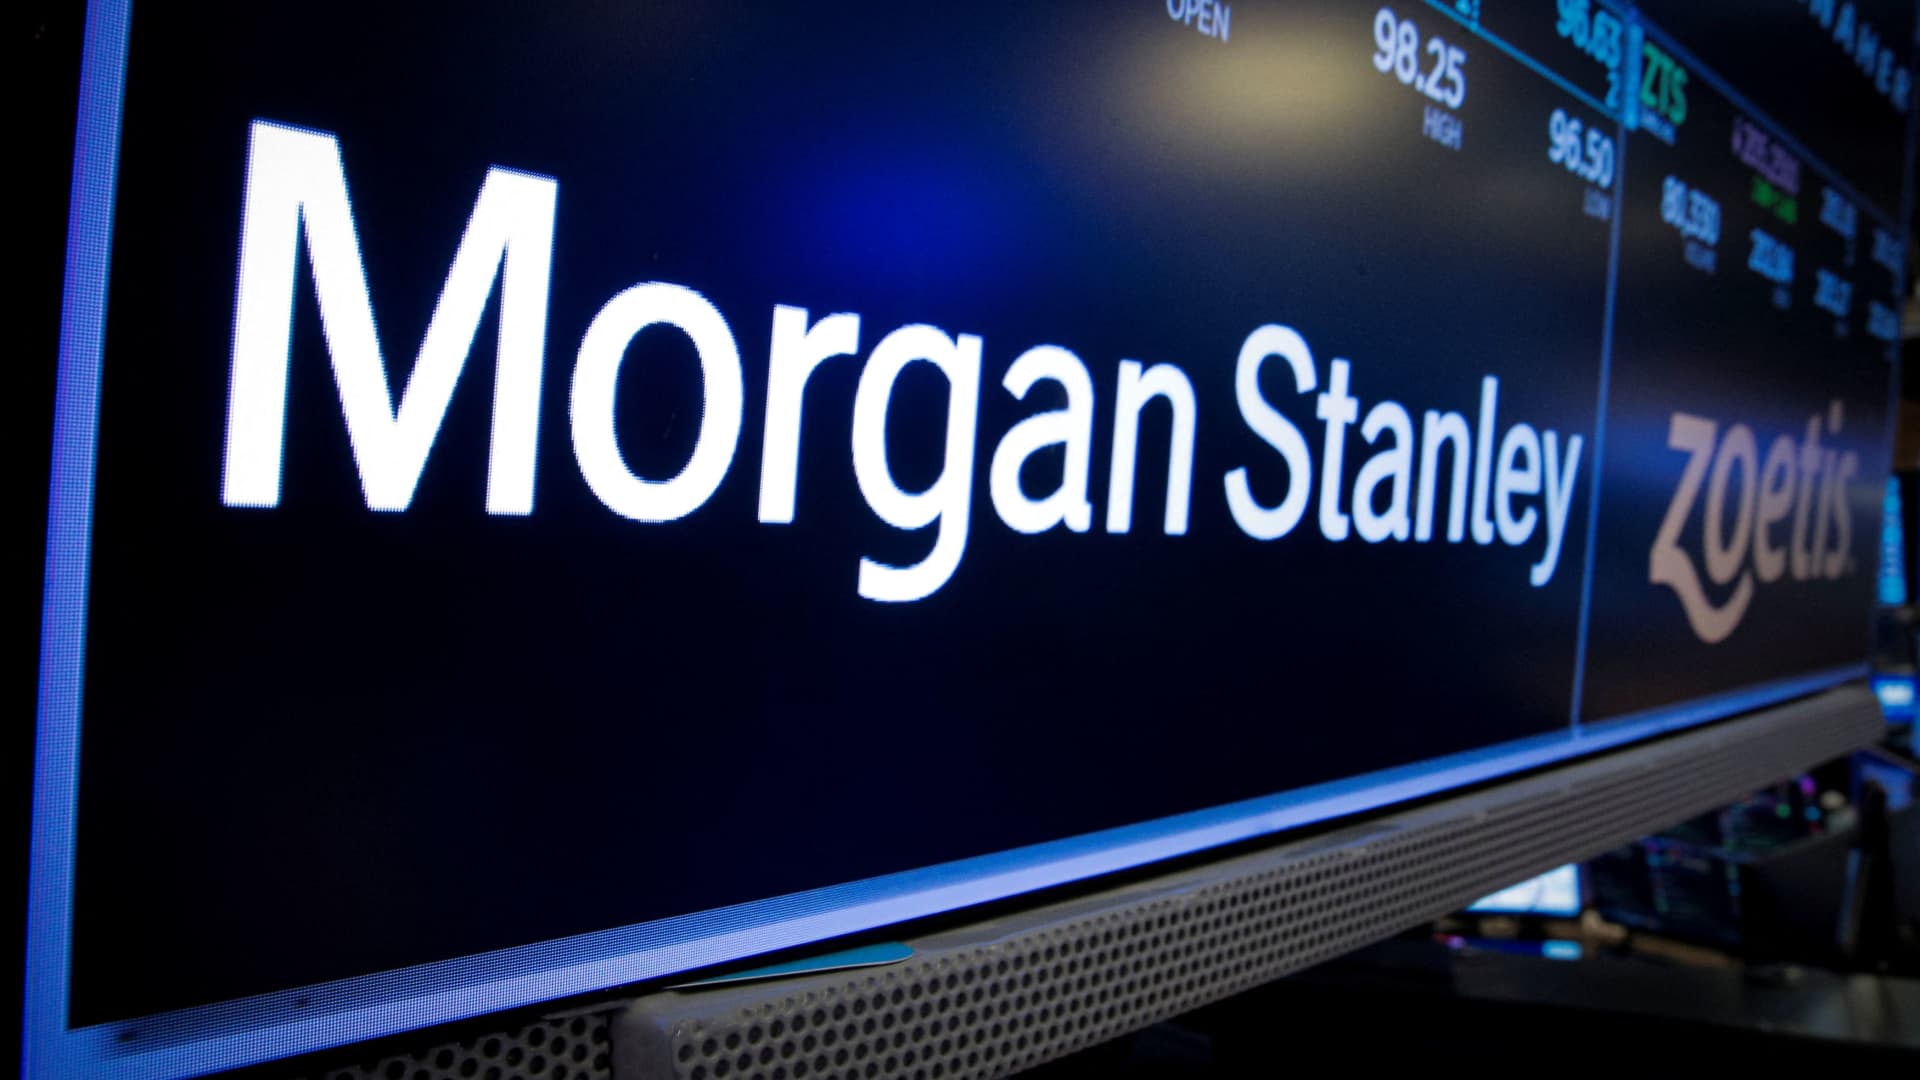 Will buy Indian stocks to tide over investment boom: Morgan Stanley